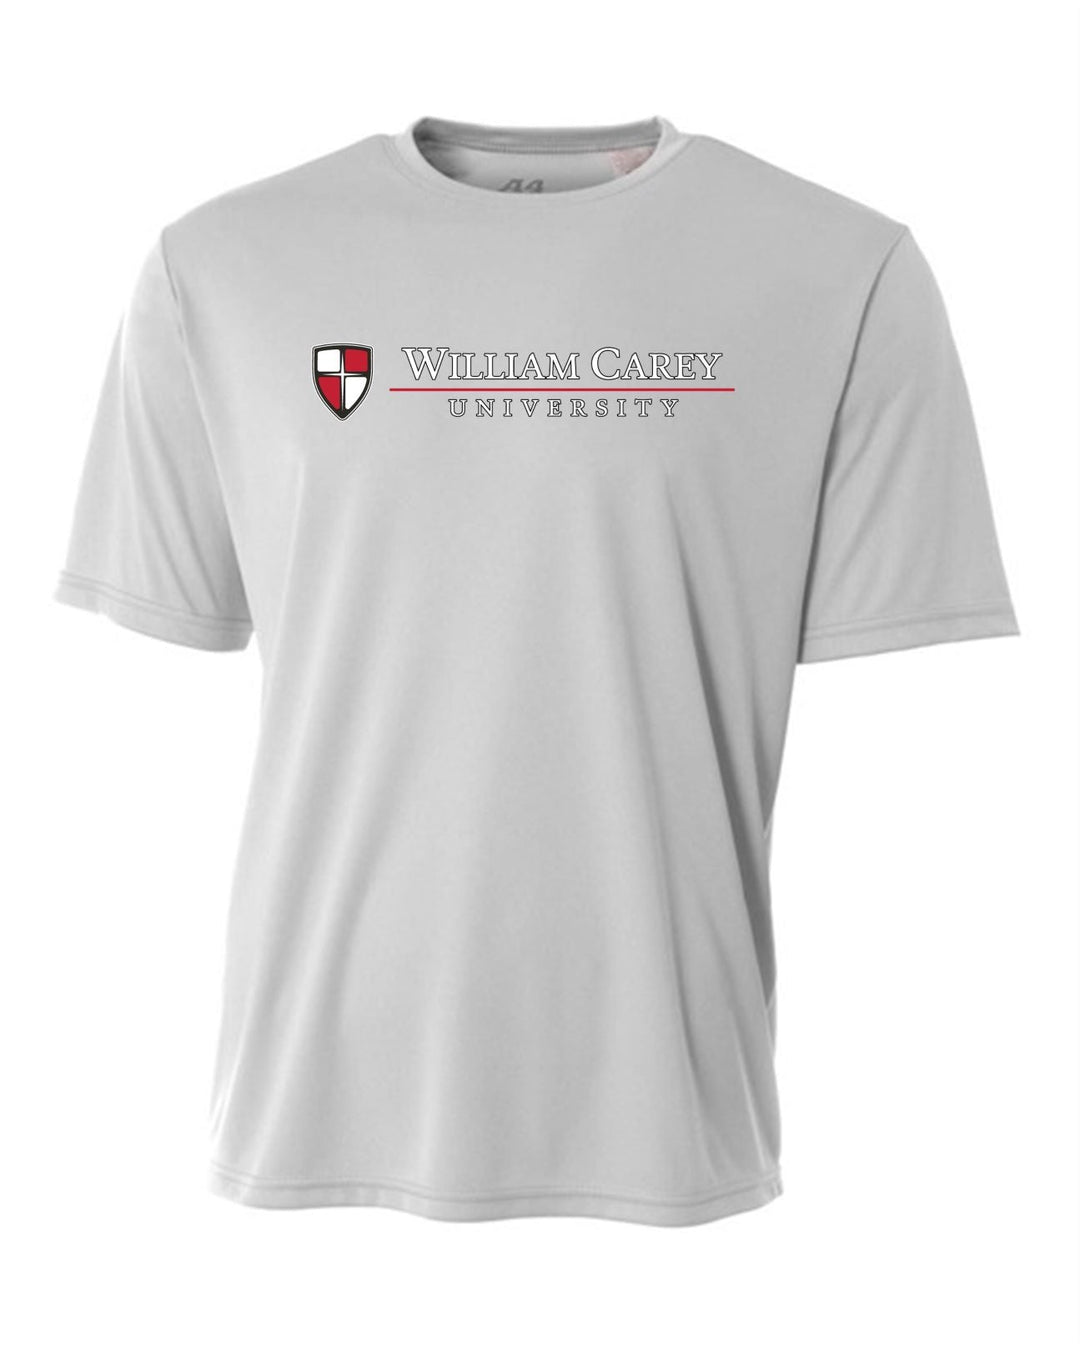 WCU School Of Natural & Behavioral Sciences Youth Short-Sleeve Performance Shirt WCU NBS Silver Grey Youth Small - Third Coast Soccer